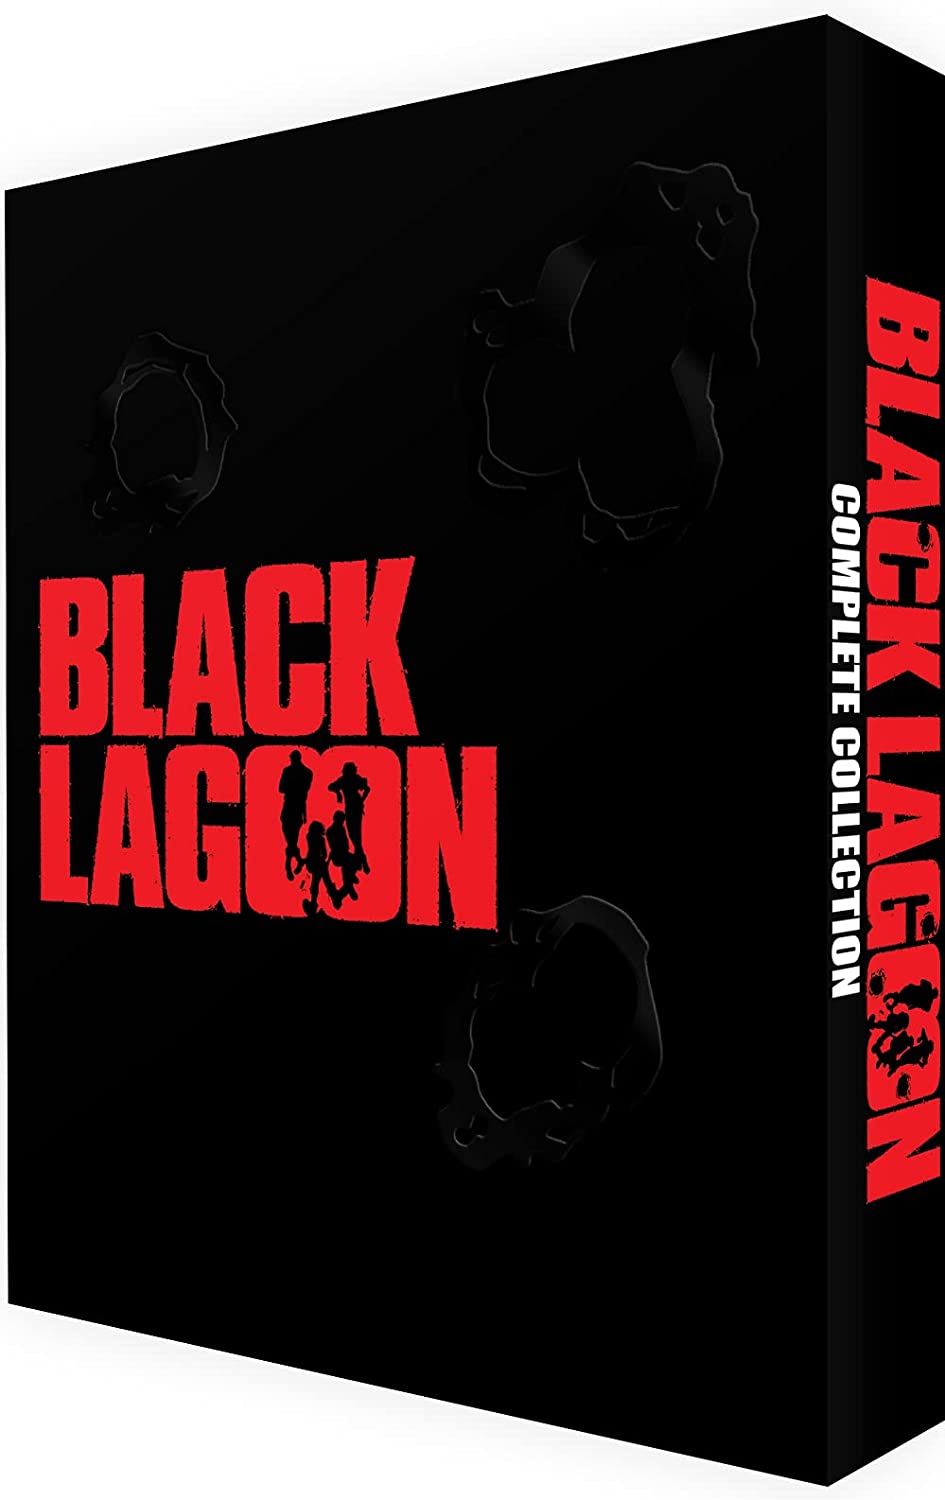 Black Lagoon – Komplette Serie (Limited Edition) – Action-Fiction [Blu-ray]